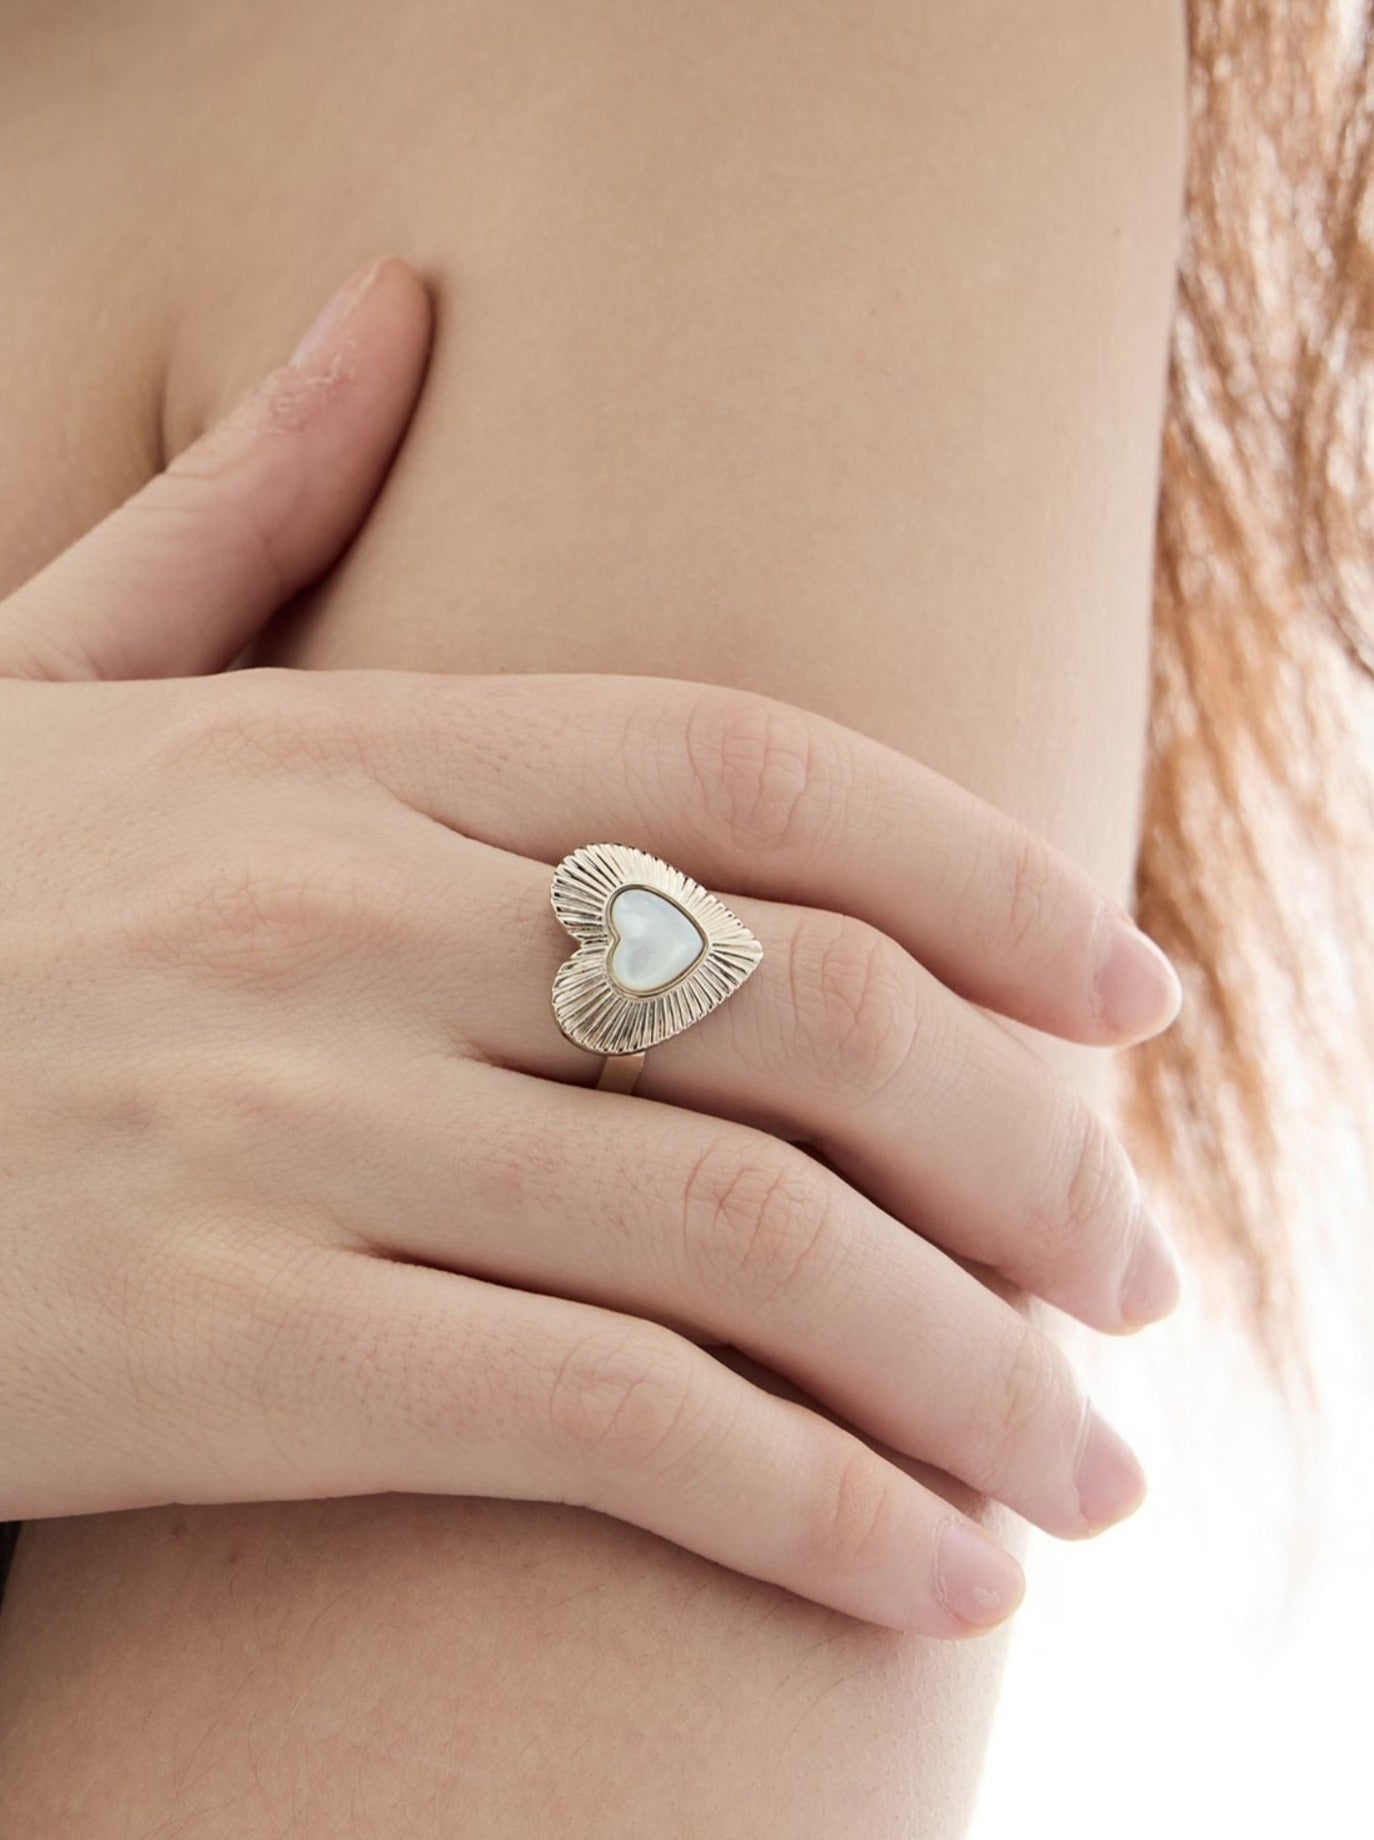 Heart shape mother of pearl open ring B2639